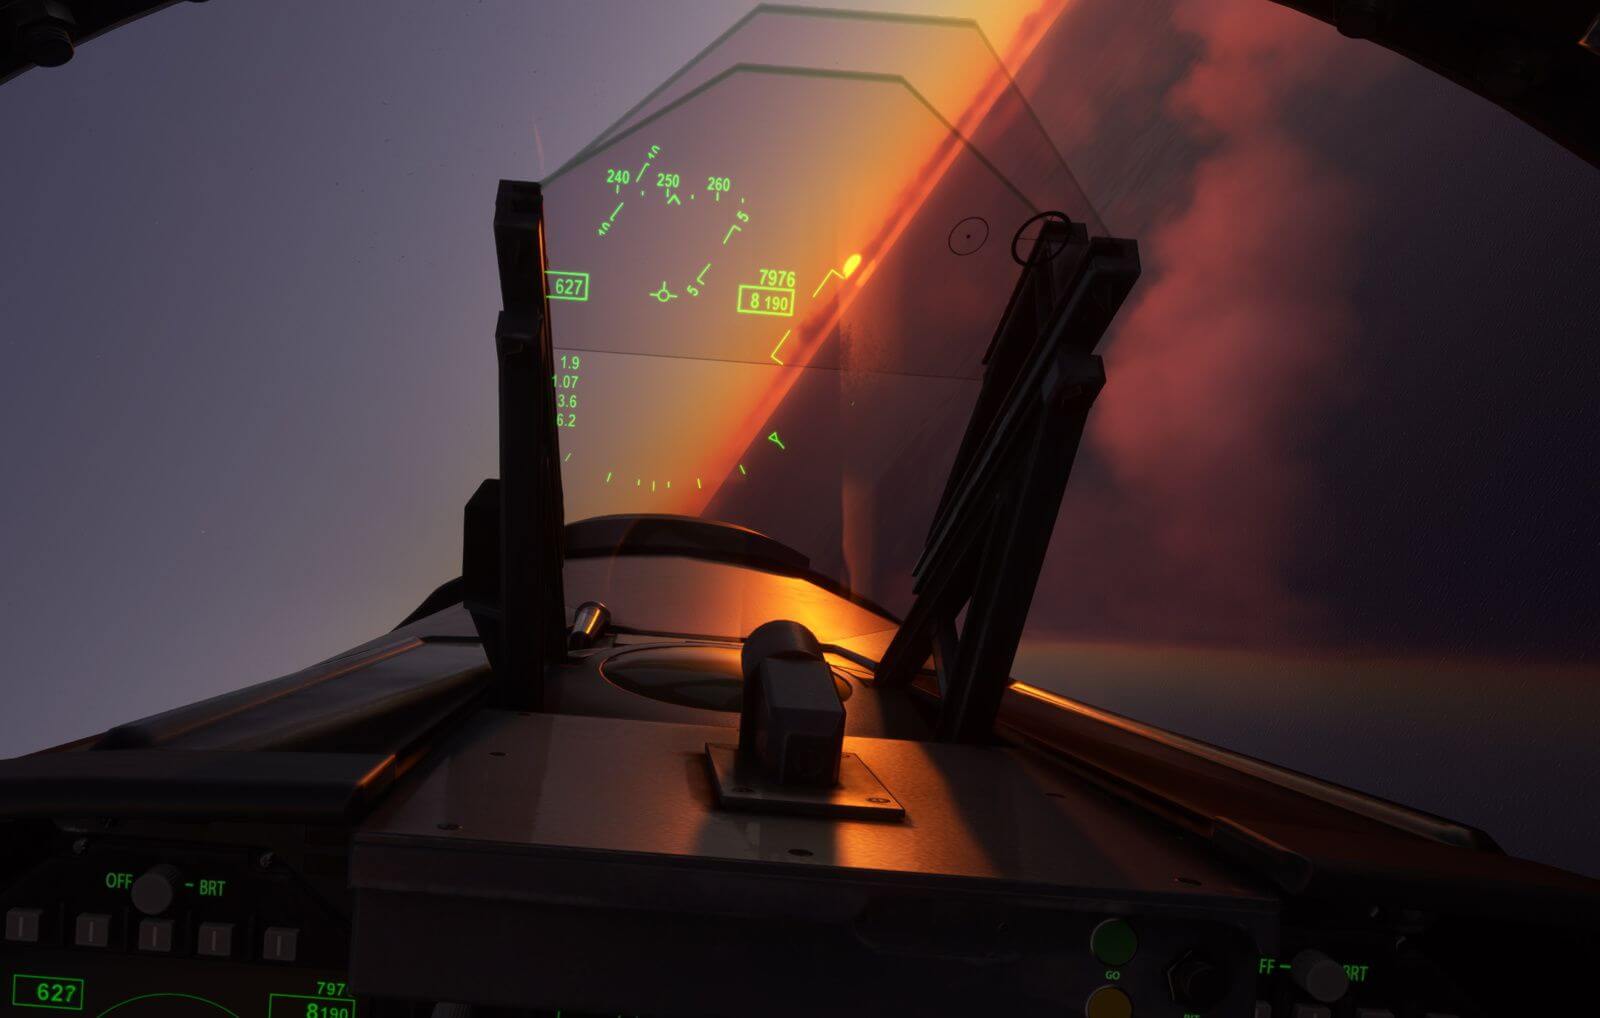 The setting sun is visible through the cockpit of a jet.